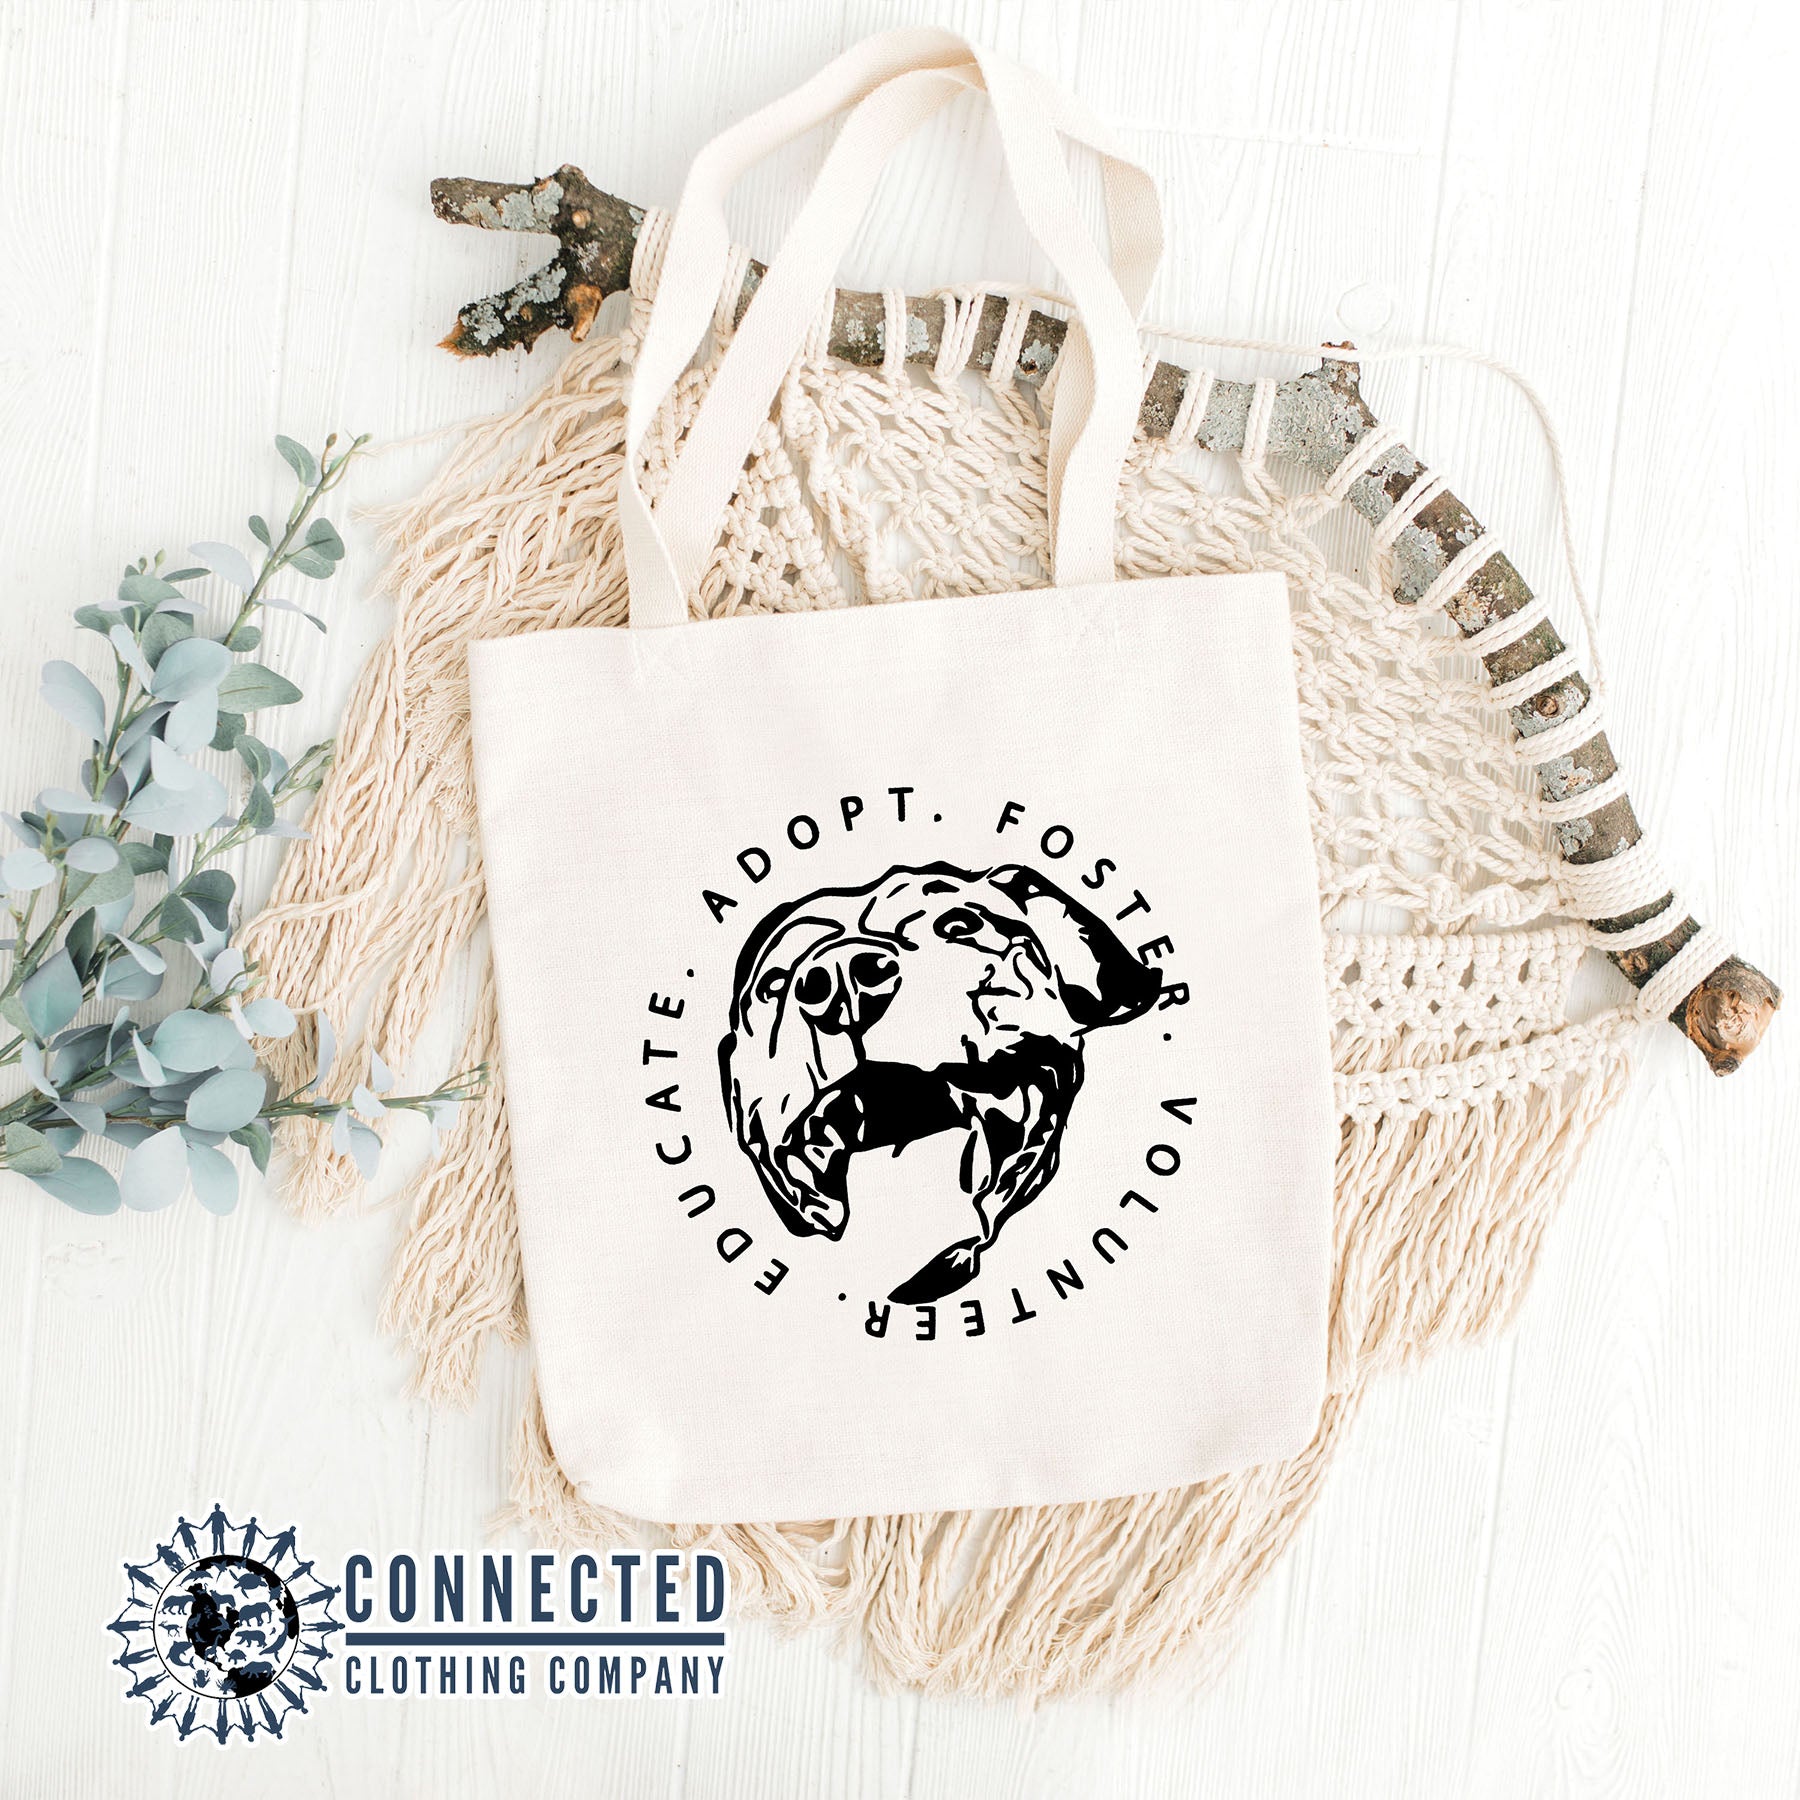 Adopt Educate Foster Volunteer Tote Bag - Connected Clothing Company - 10% of proceeds donated to animal rescue